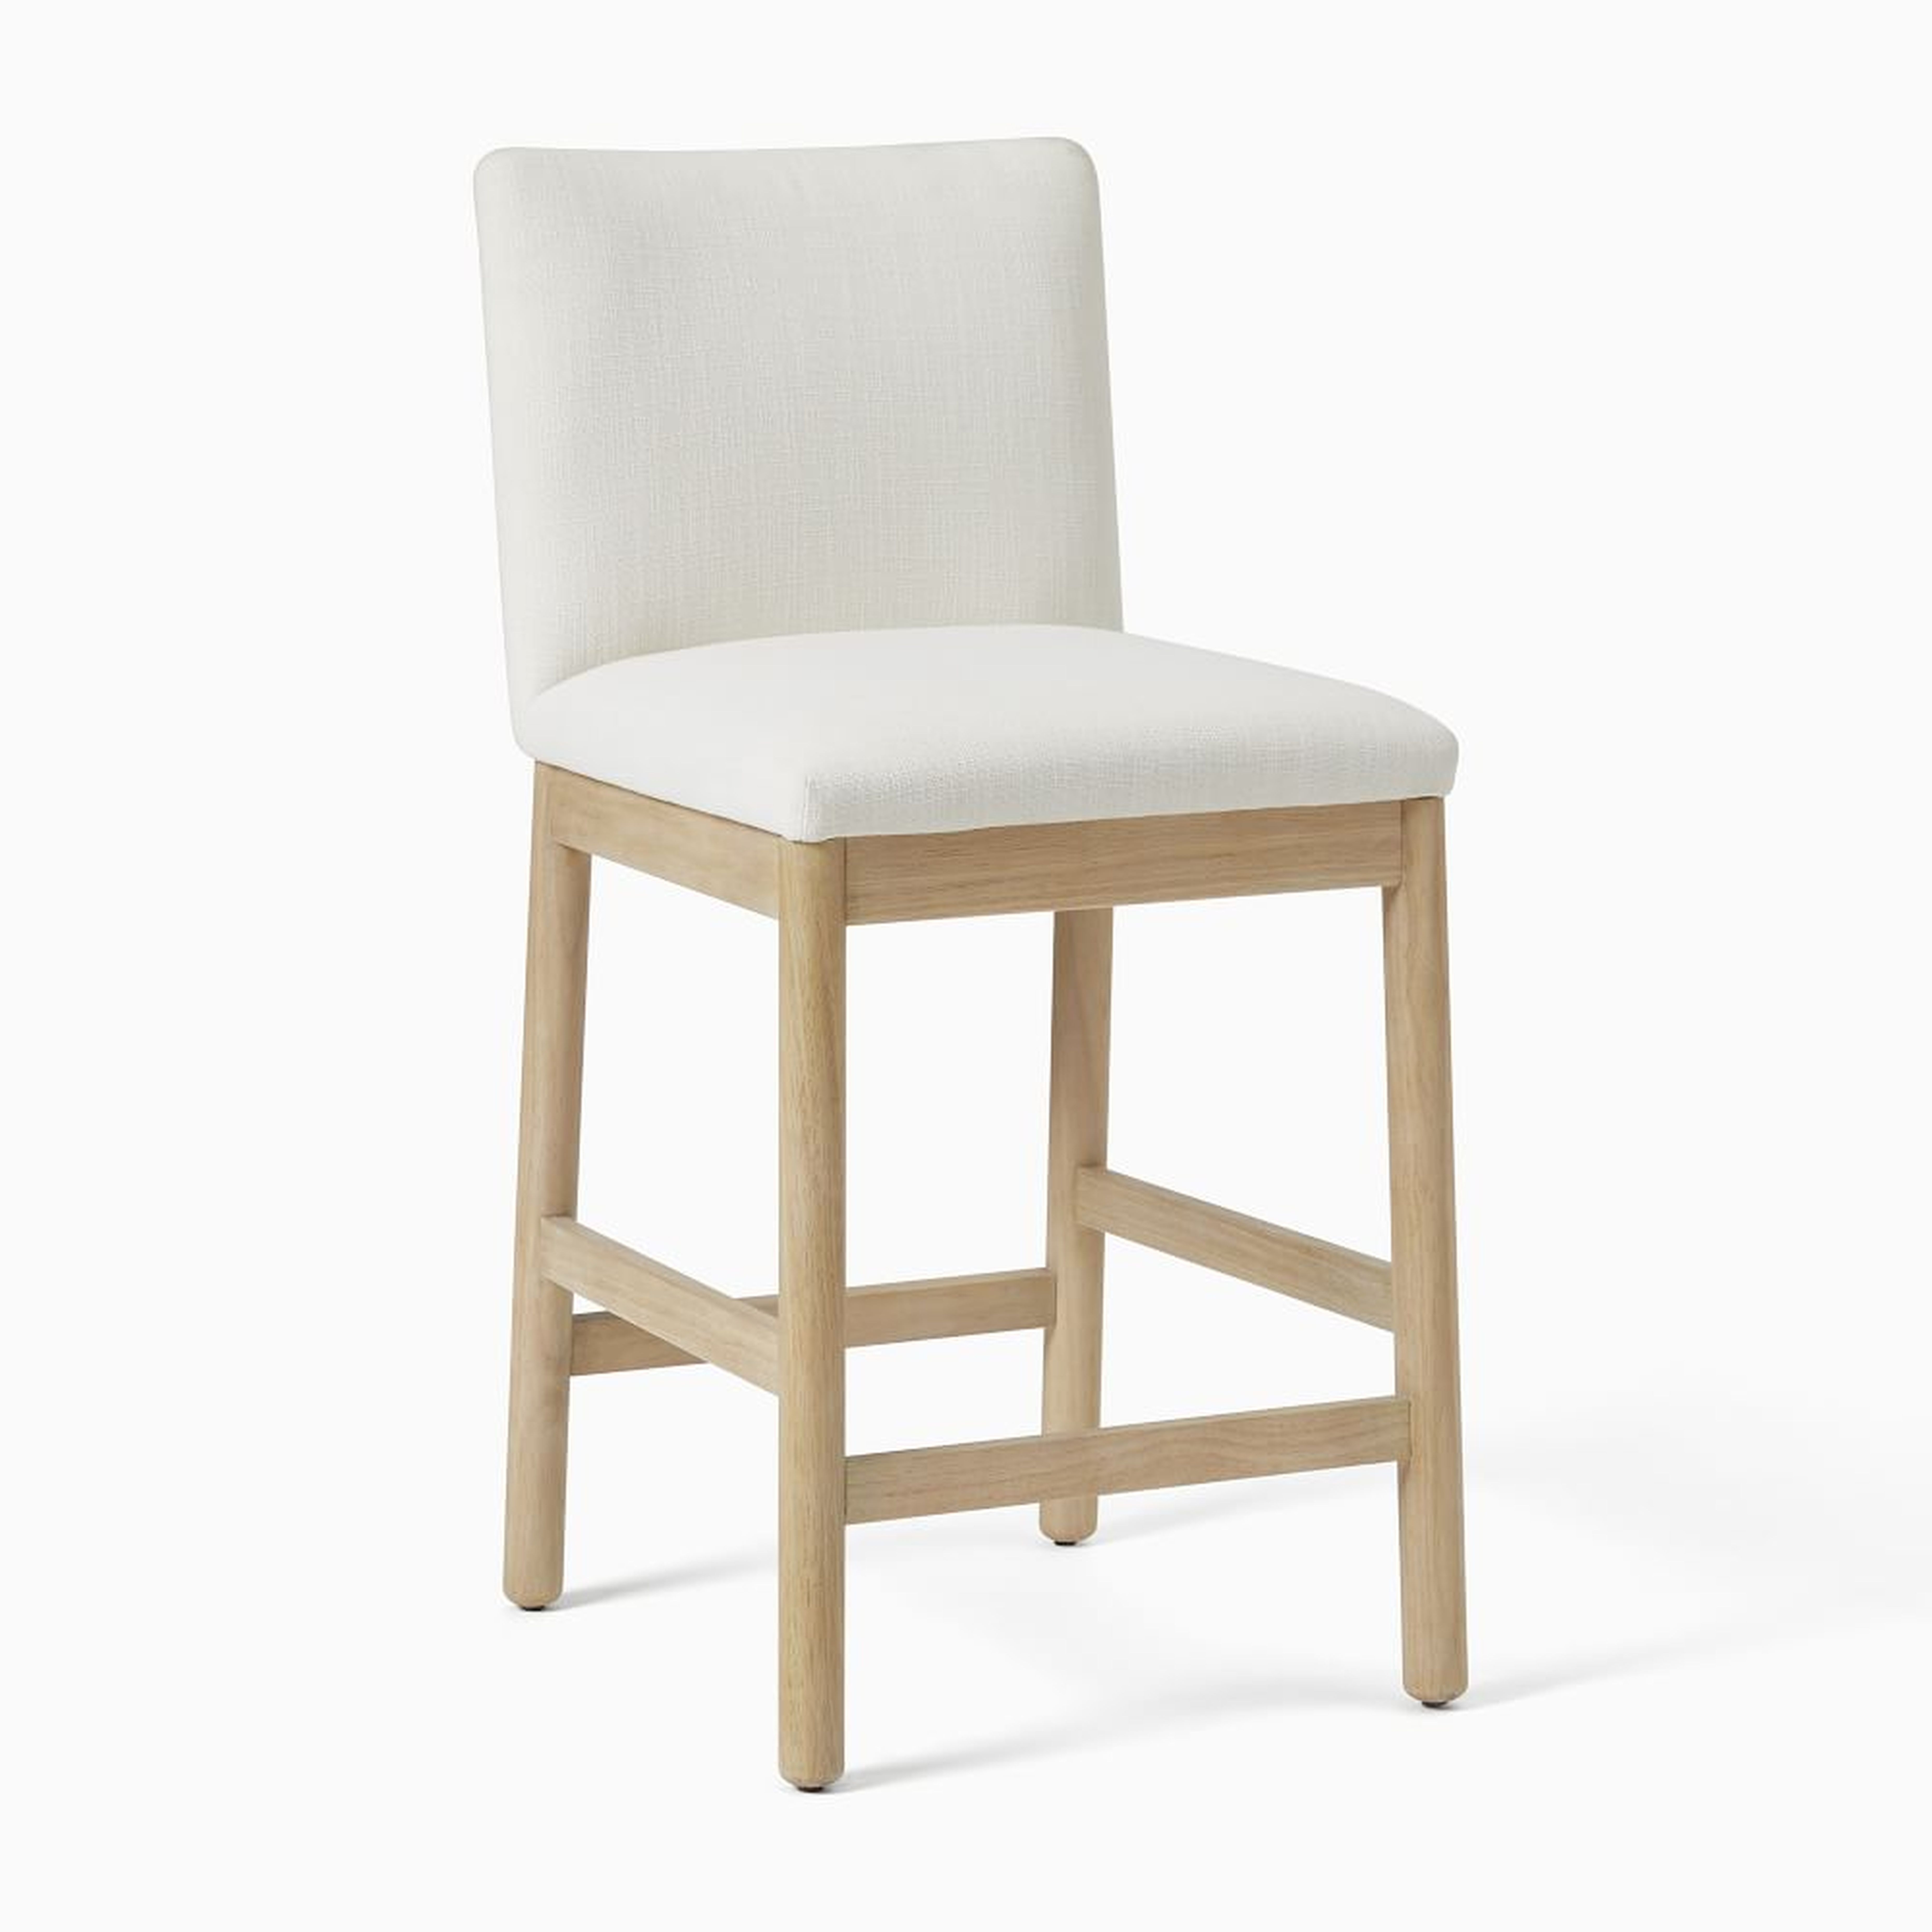 Hargrove Counter Stool, Yarn Dyed Linen Weave, Alabaster, Dune - West Elm